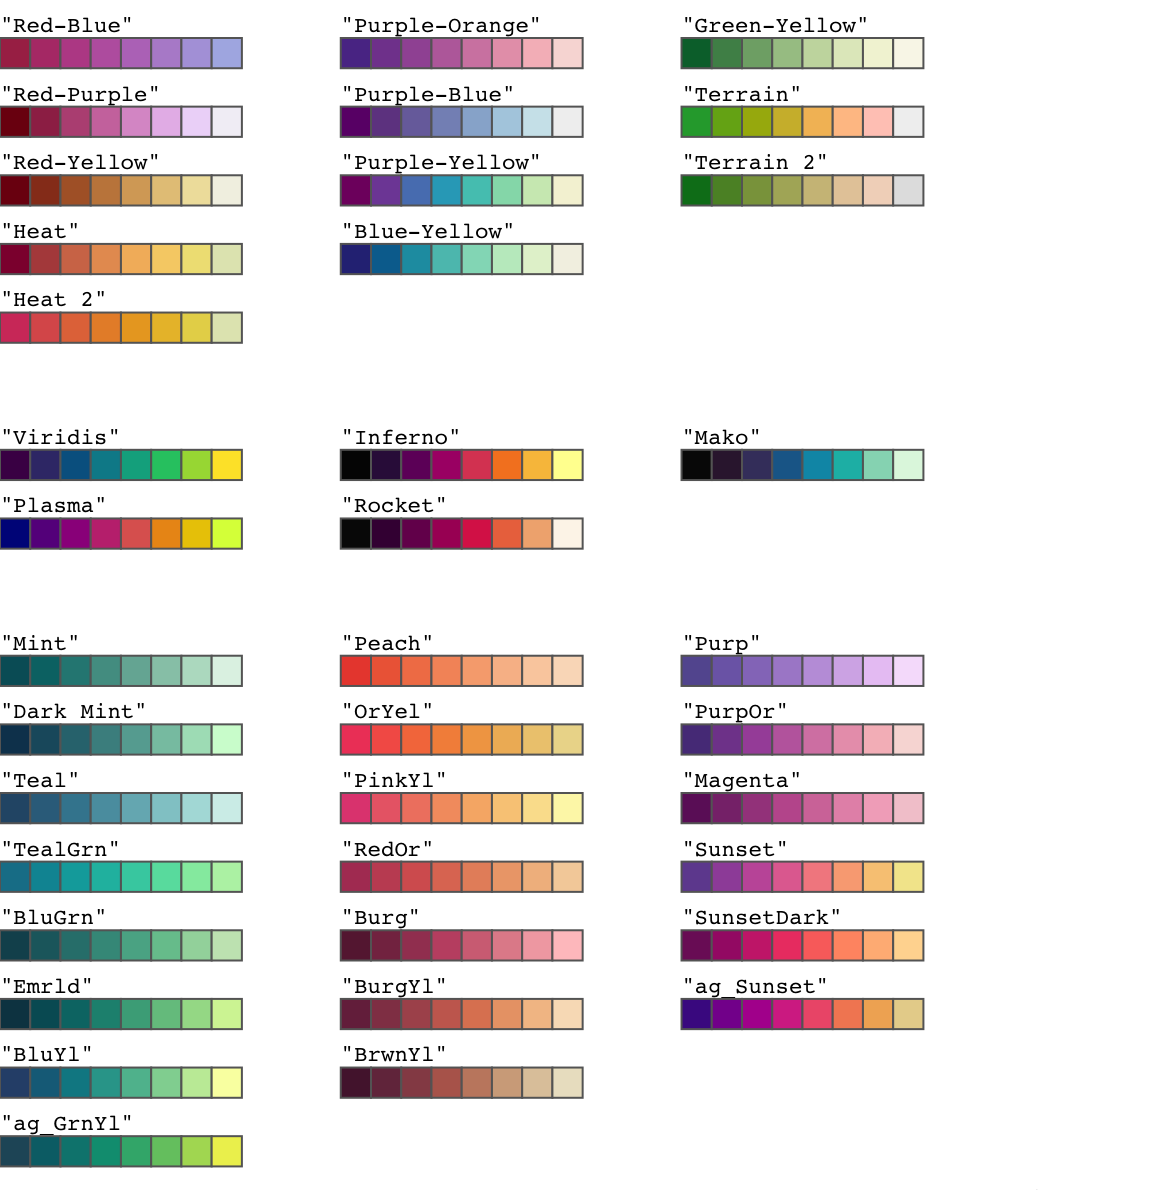 Some of the multi-hue sequential palettes that are available with the `hcl.colors()` function.